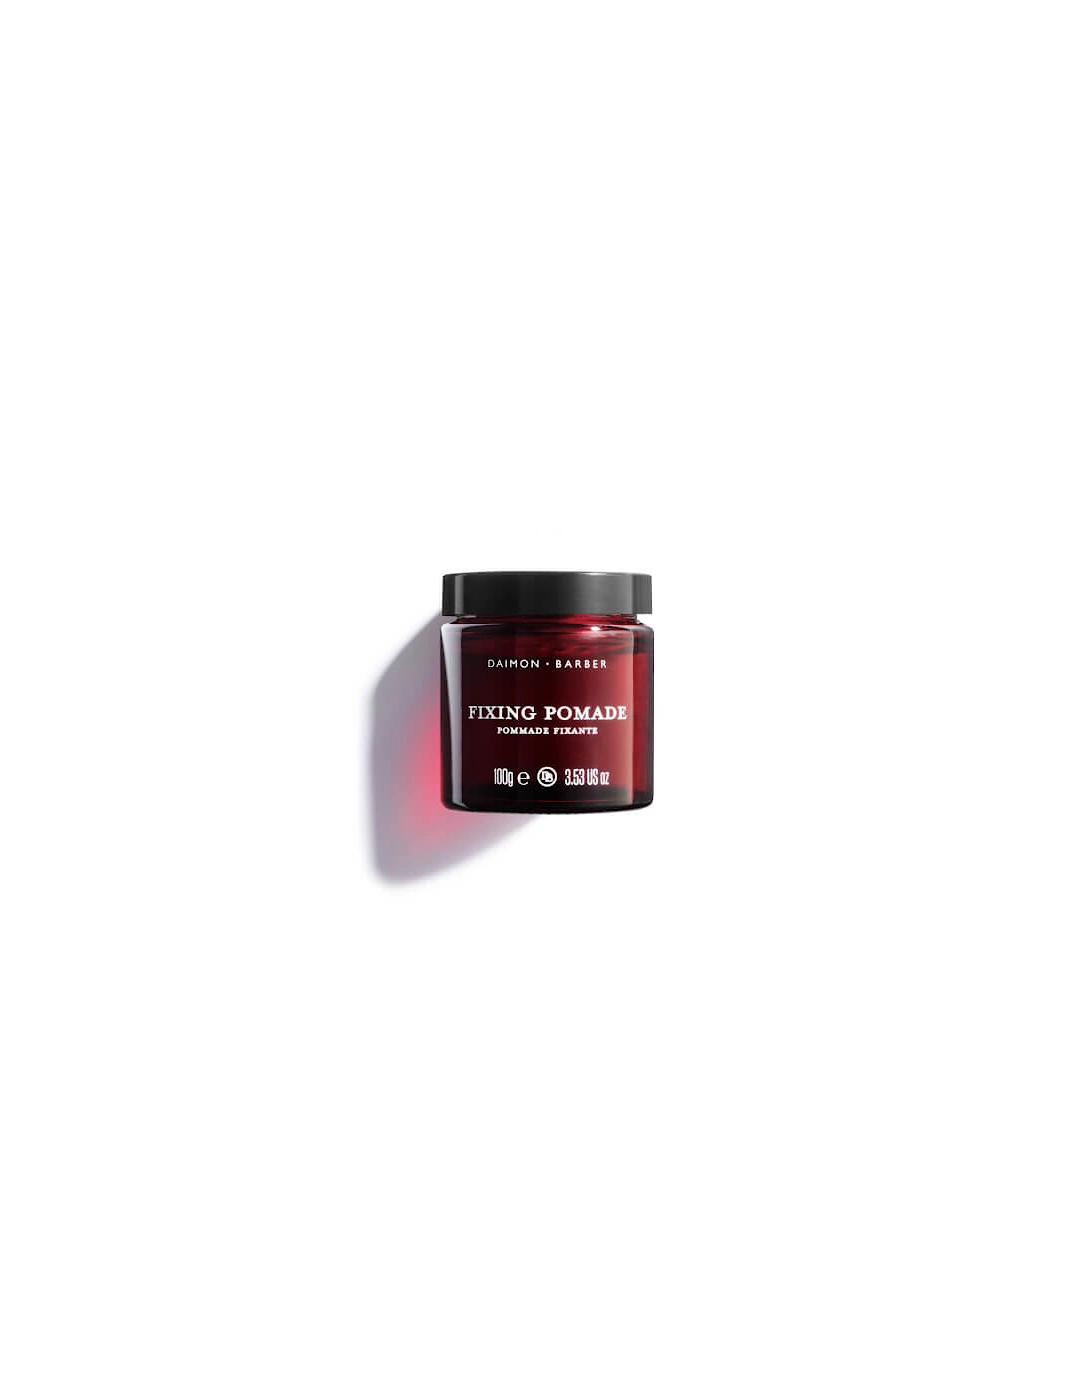 Fixing Pomade 100g - Daimon Barber, 2 of 1